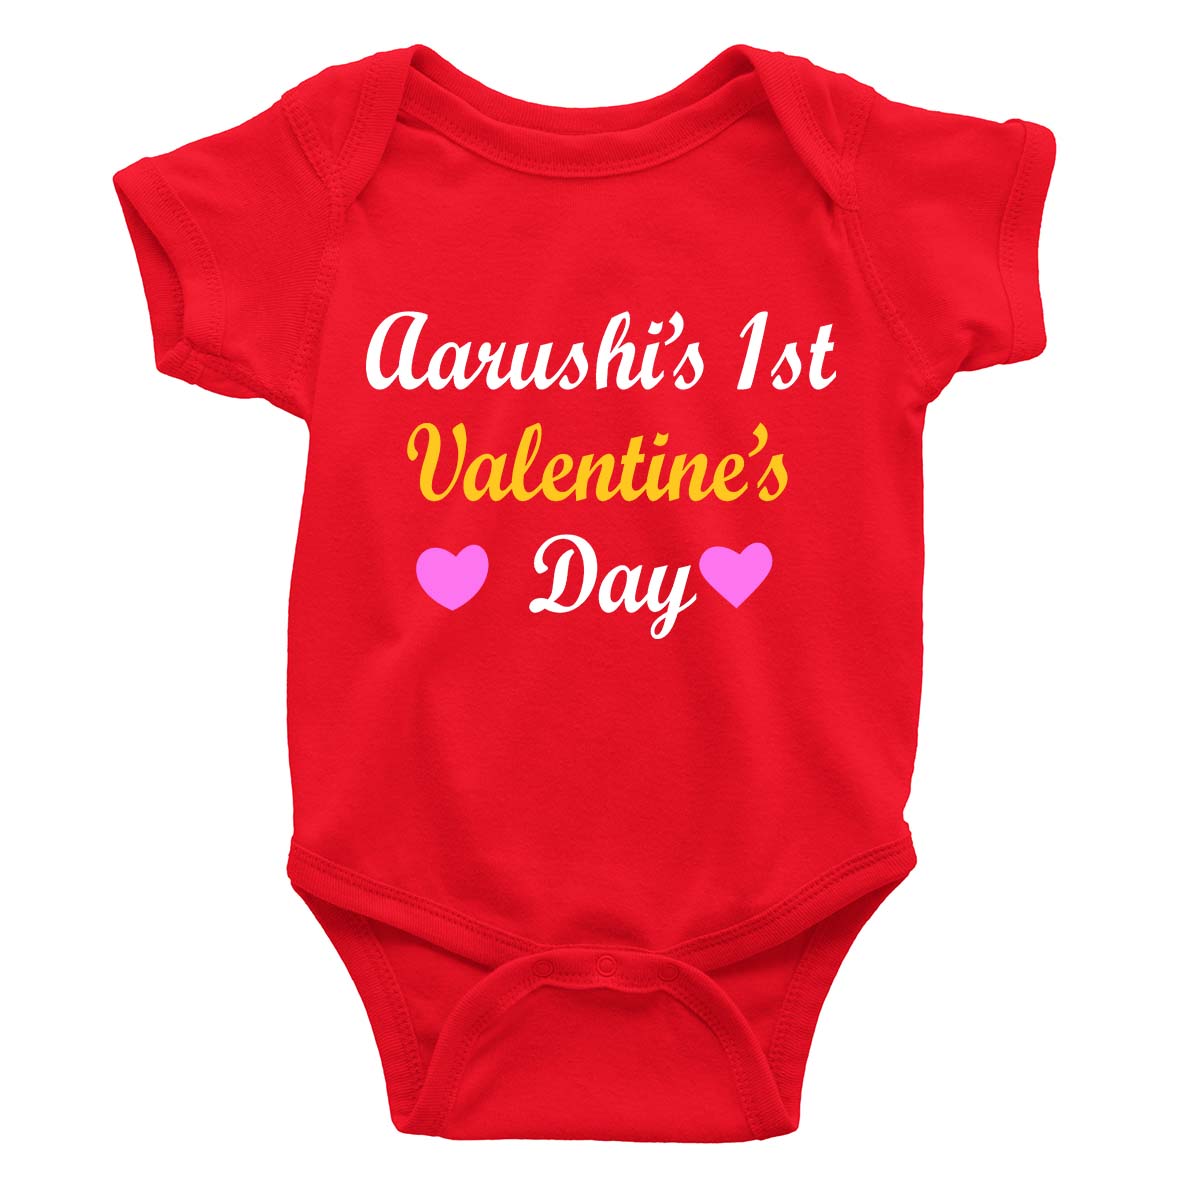 Aarushi 1st valentine's day red